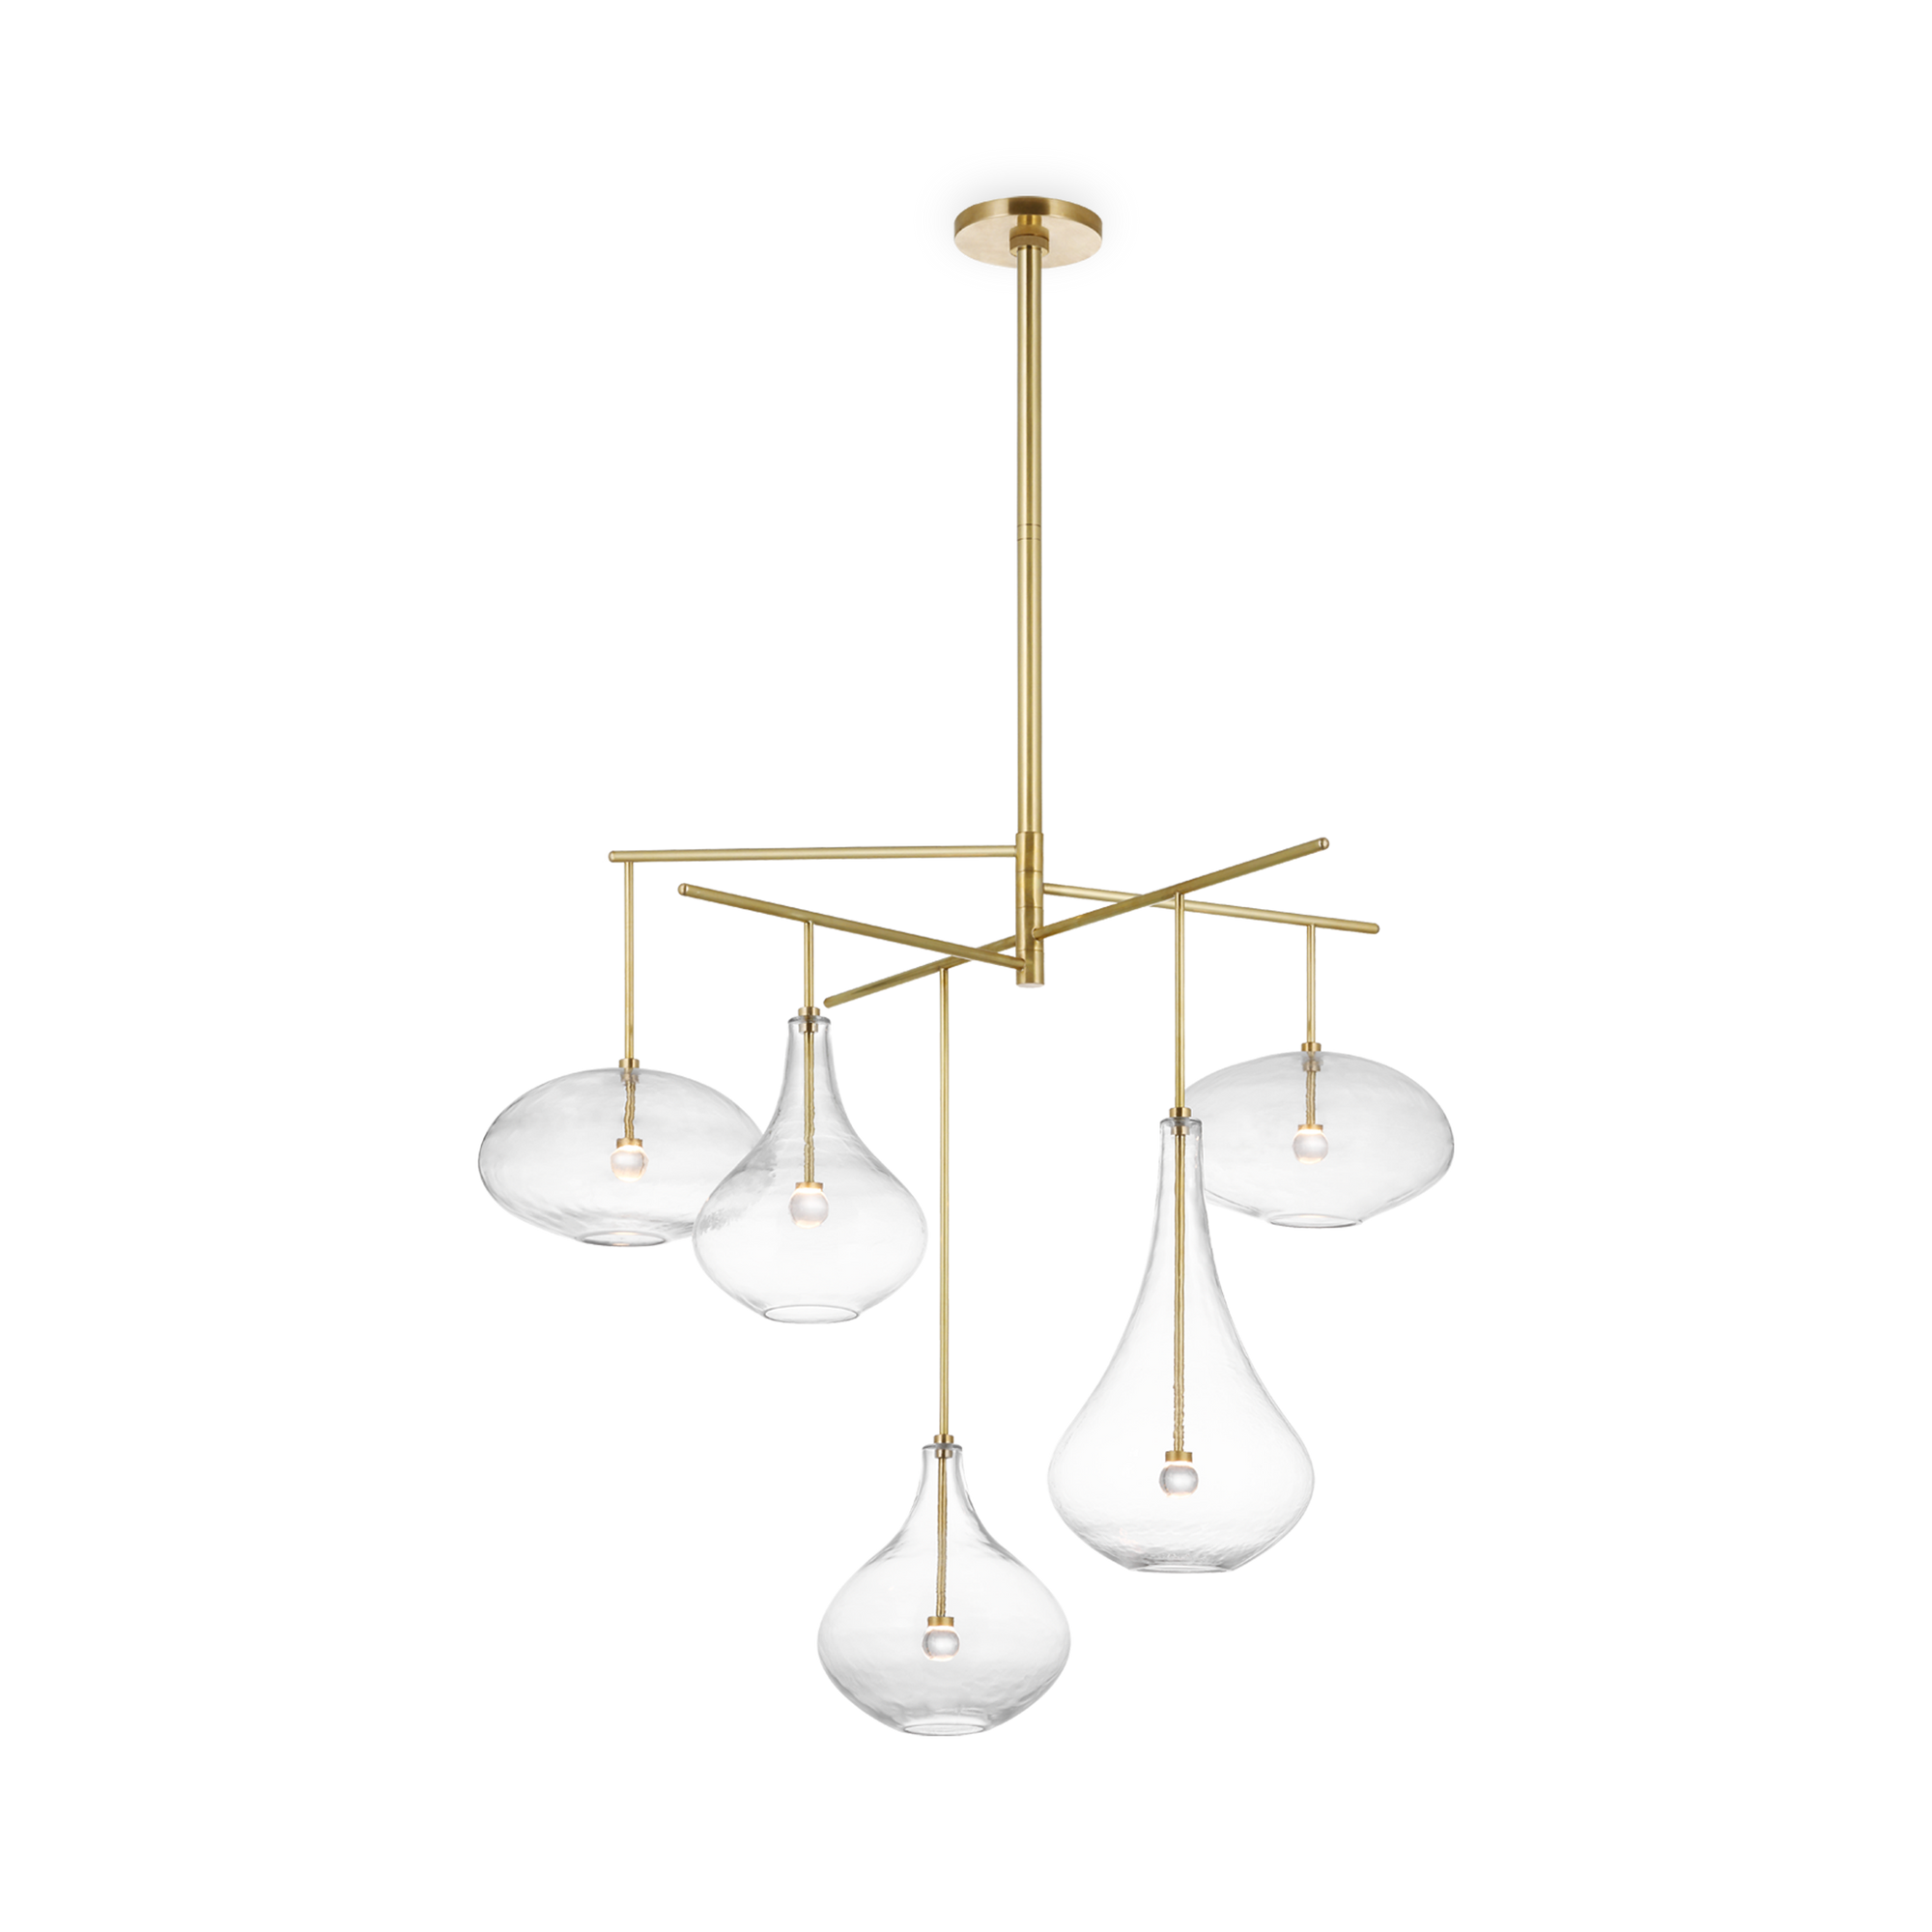 The Lomme Led Chandelier features styling that would be at home in a range of spaces with its  imaginative globes in blown glass details.